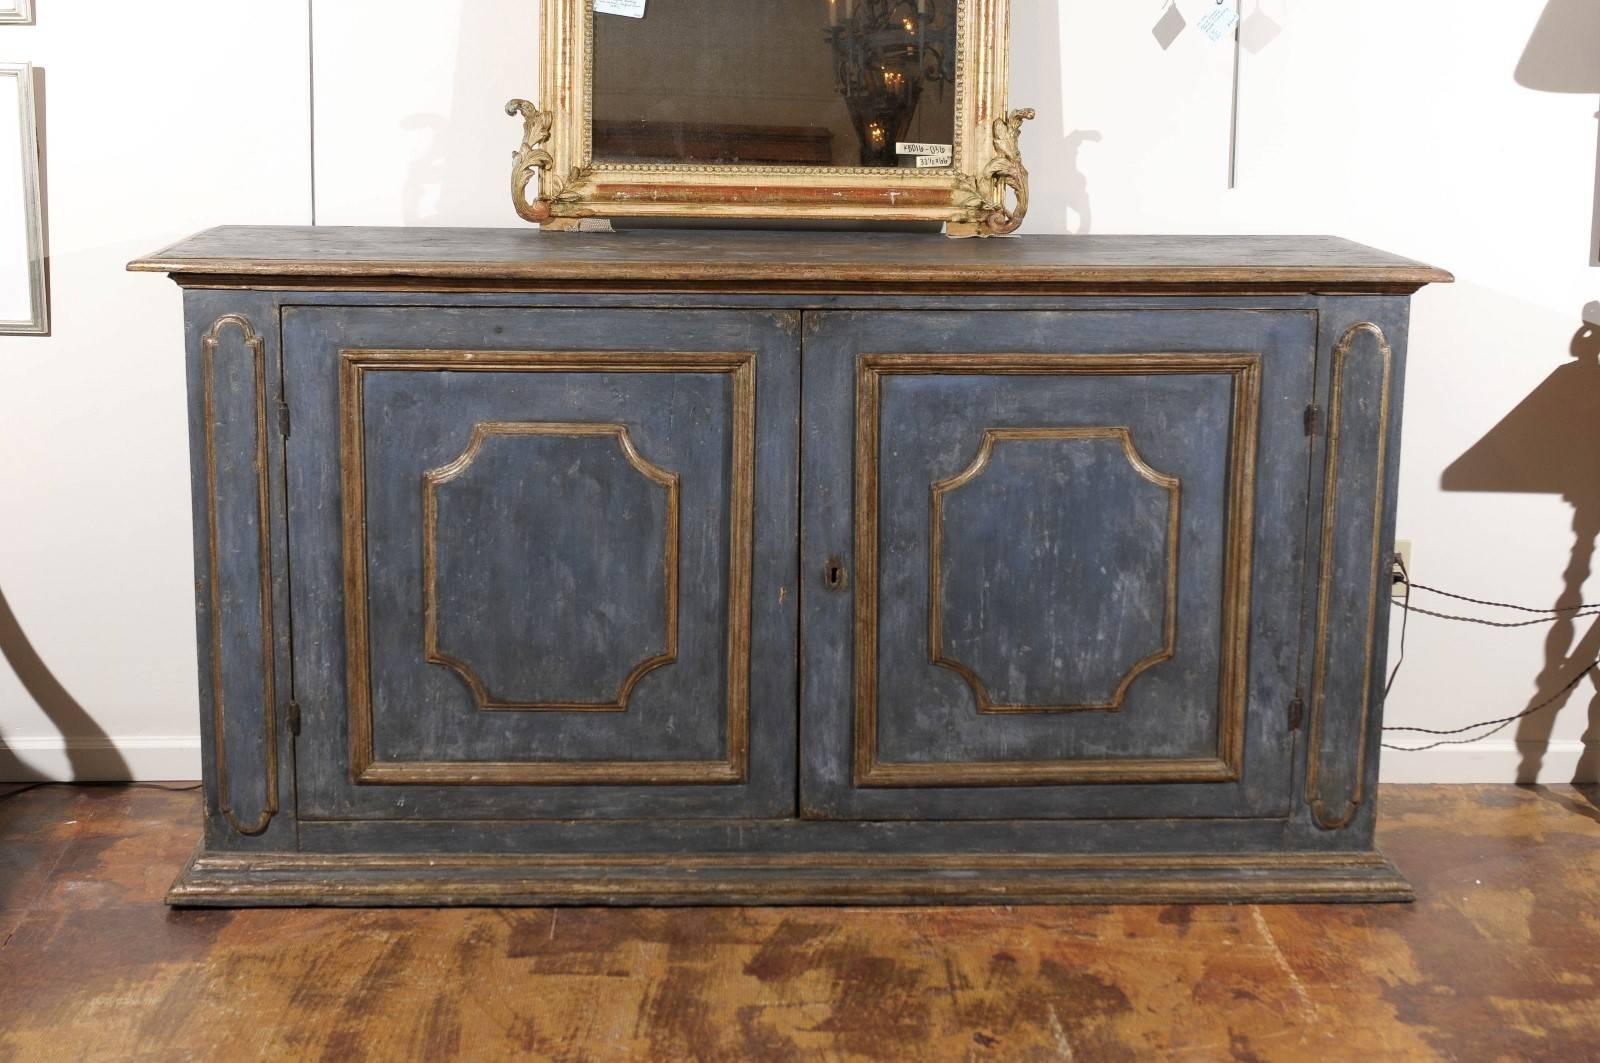 Mid-19th century Italian poplar buffet, the blue and gilt painted all-over top surmounting a double door cabinet opening to storage raised on a conforming plinth, Florence.